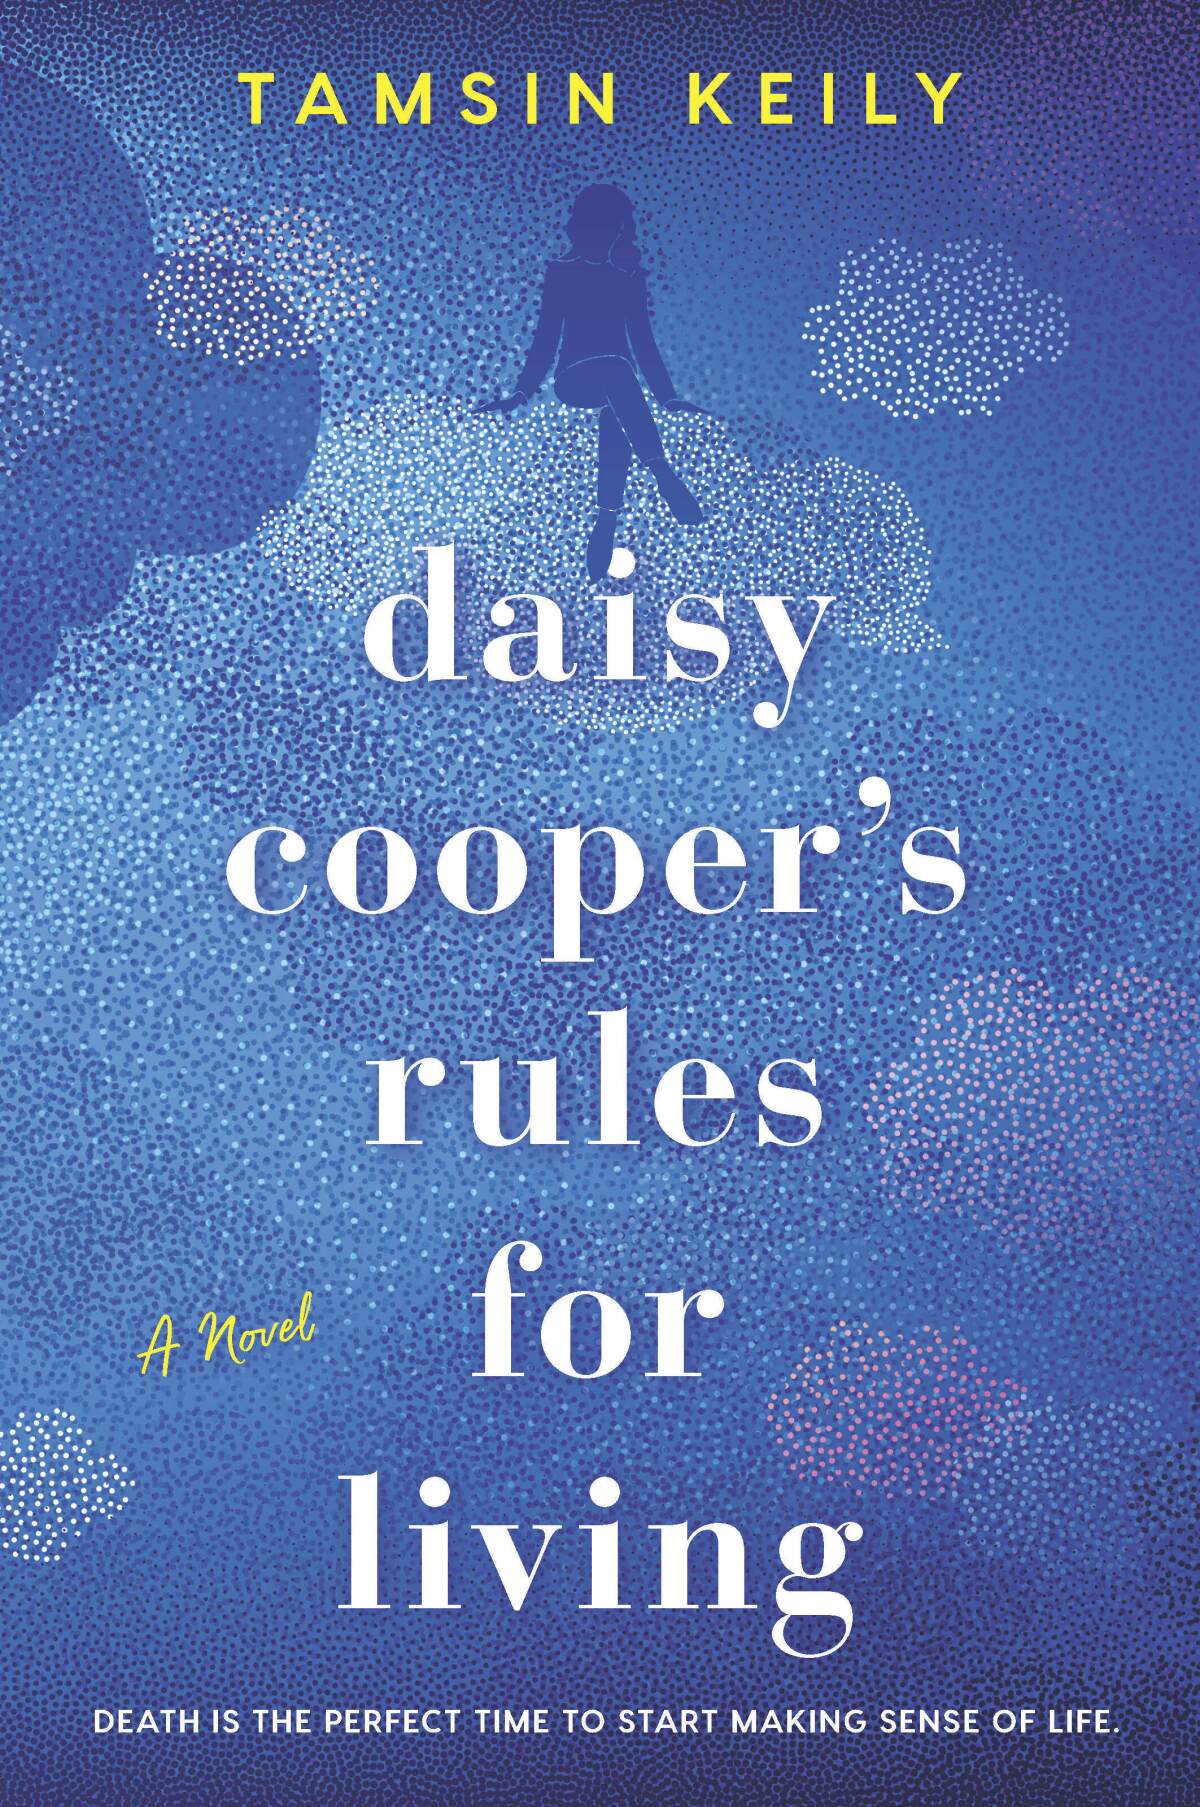 Book Review - Daisy Cooper's Rules for Living